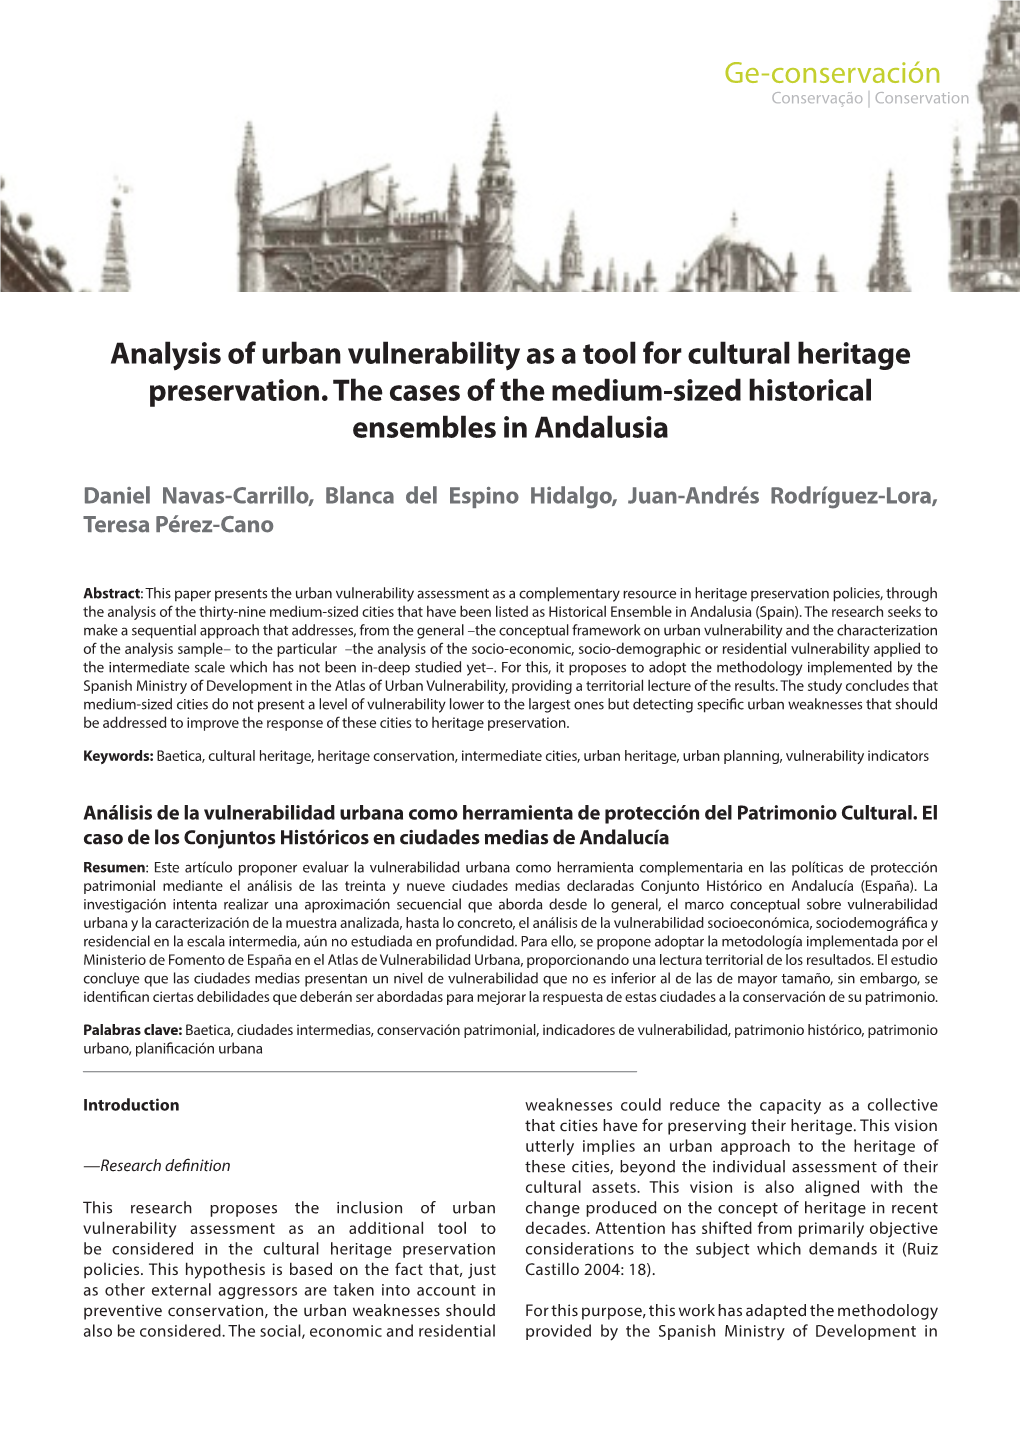 Analysis of Urban Vulnerability As a Tool for Cultural Heritage Preservation